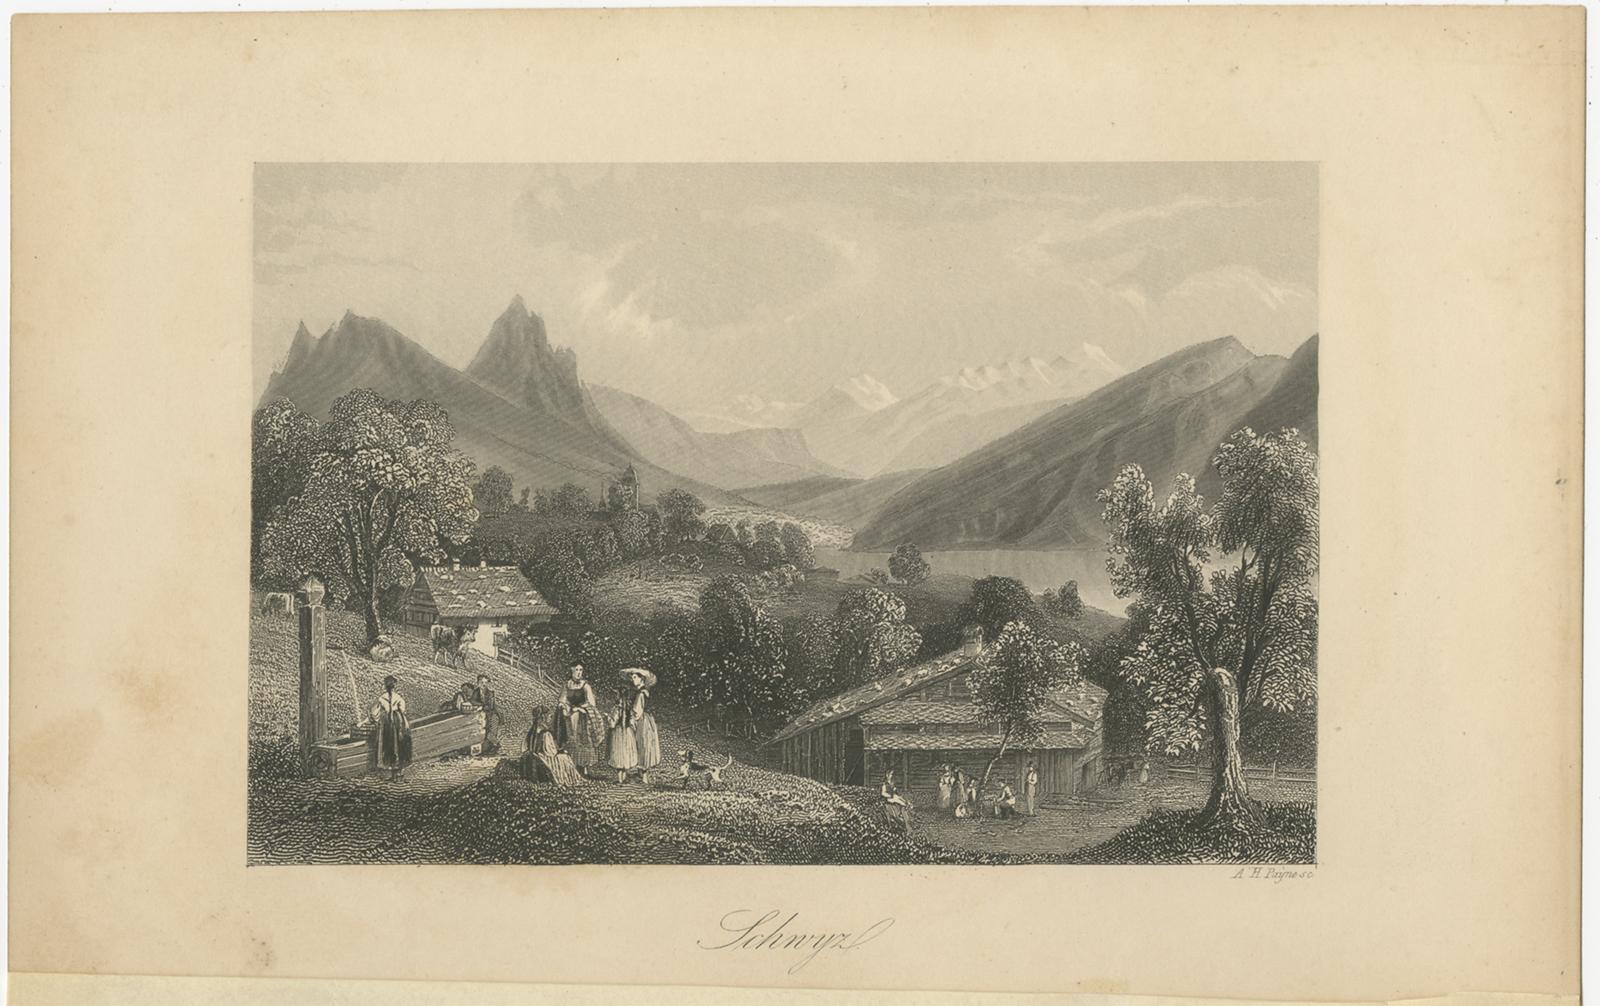 Antique print titled 'Schwyz'. View of the city of Schwyz, Switzerland. Engraved by A.H. Payne, published circa 1850.